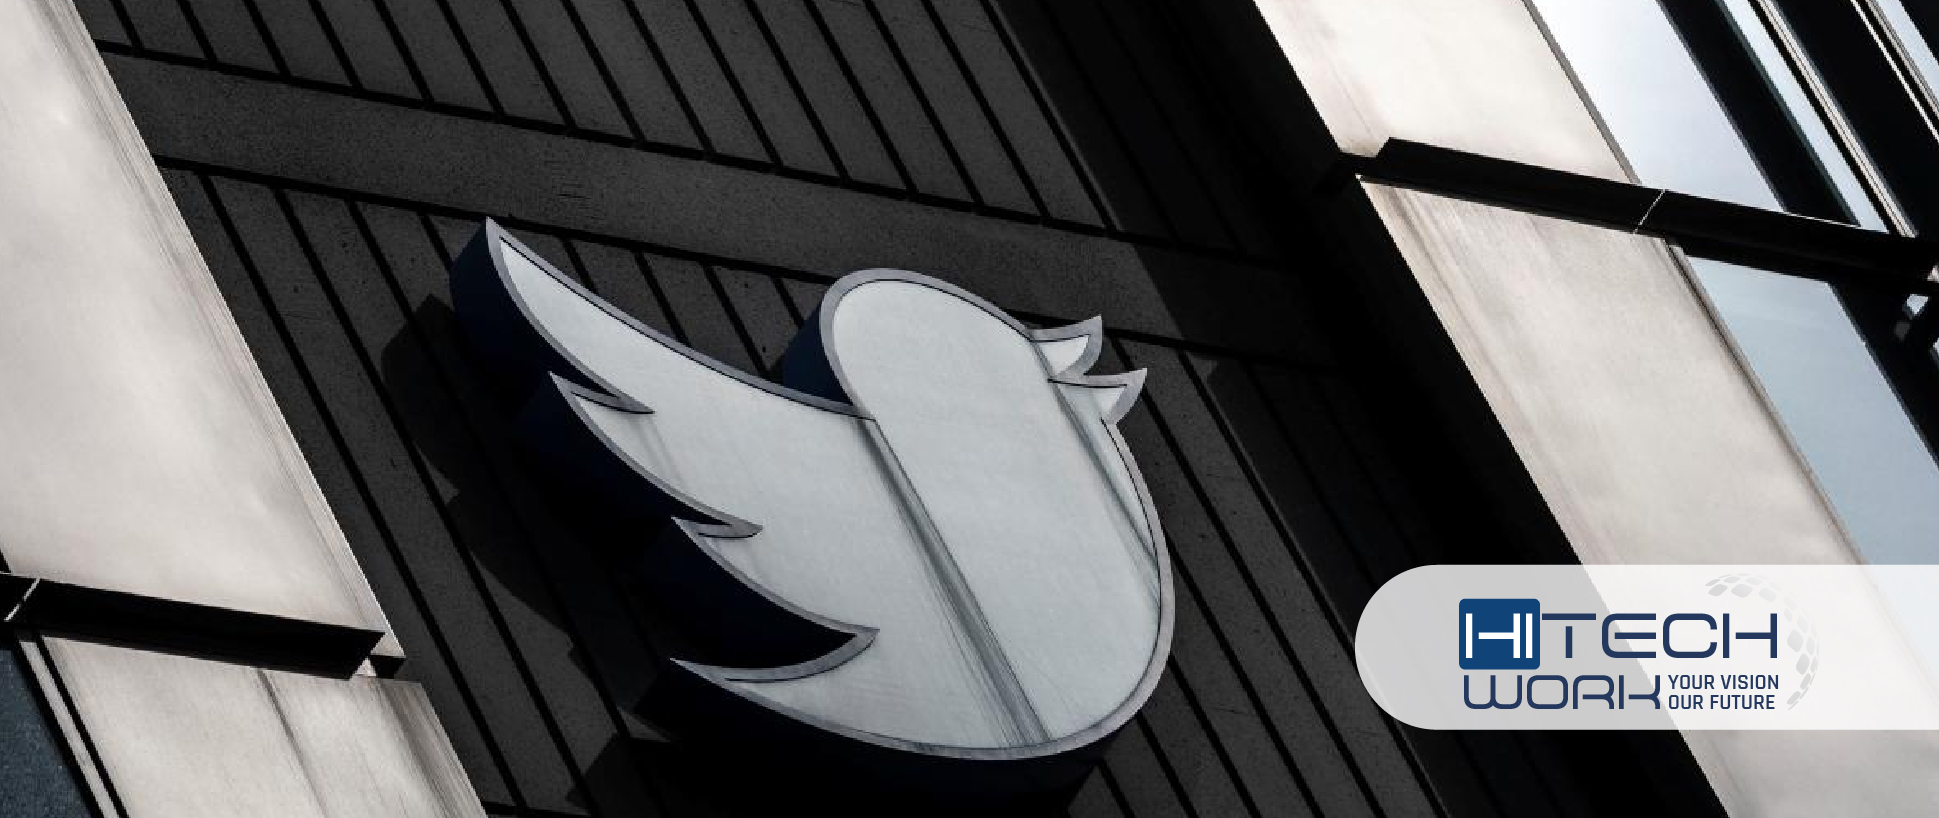 Twitter Declares a Security Incident